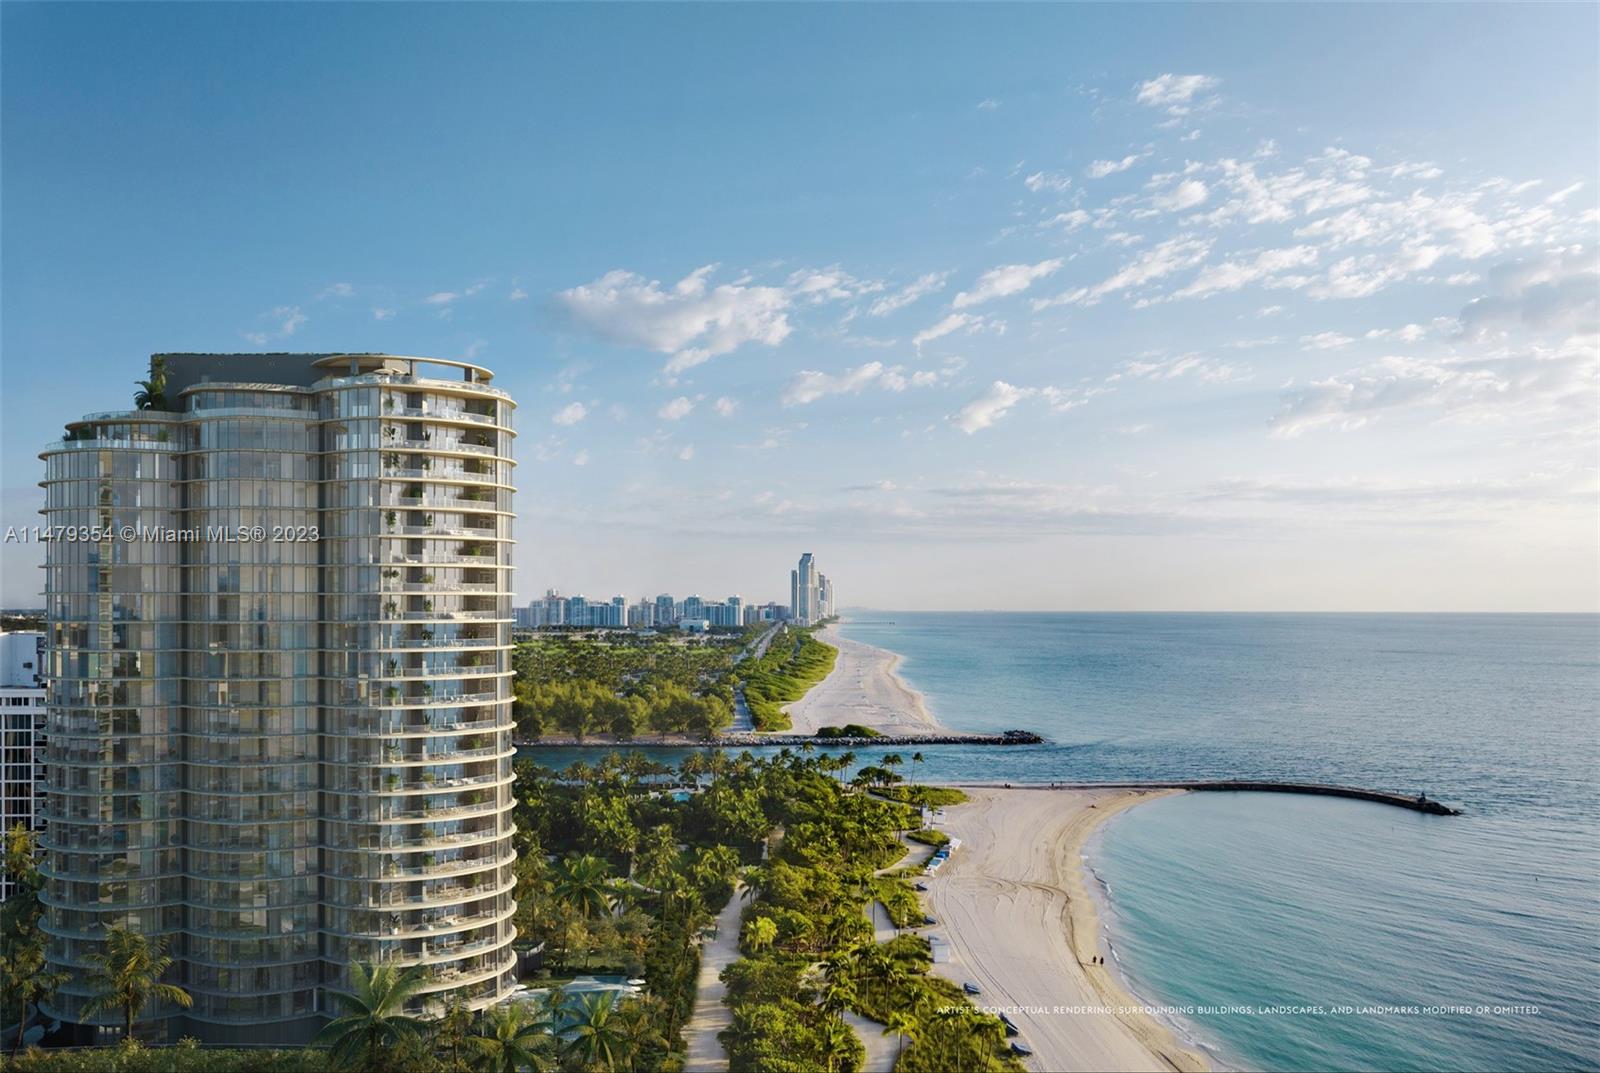 Designed by renowned architecture firm, Rivage Bal Harbour is perfectly positioned on the most beautiful stretch of sand in the country. Steps from Bal Harbour Shops, owners will enjoy the best of this exclusive beachfront enclave with residents-only amenities including oceanfront dining, two pools, beach service, cocktail lounge, padel and pickleball courts, and spa with sauna, hammam, hot/cold plunge pools. Residences, at no more than three per floor, are reminiscent of private homes with gracious, light-filled floor plans, oversized primary suites, deep terraces for entertaining, private elevators, and enclosed two-car garages. Bespoke kitchens, exquisite bathrooms, and fully finished wardrobes are designed by Rottet Studio with impeccable attention to detail.